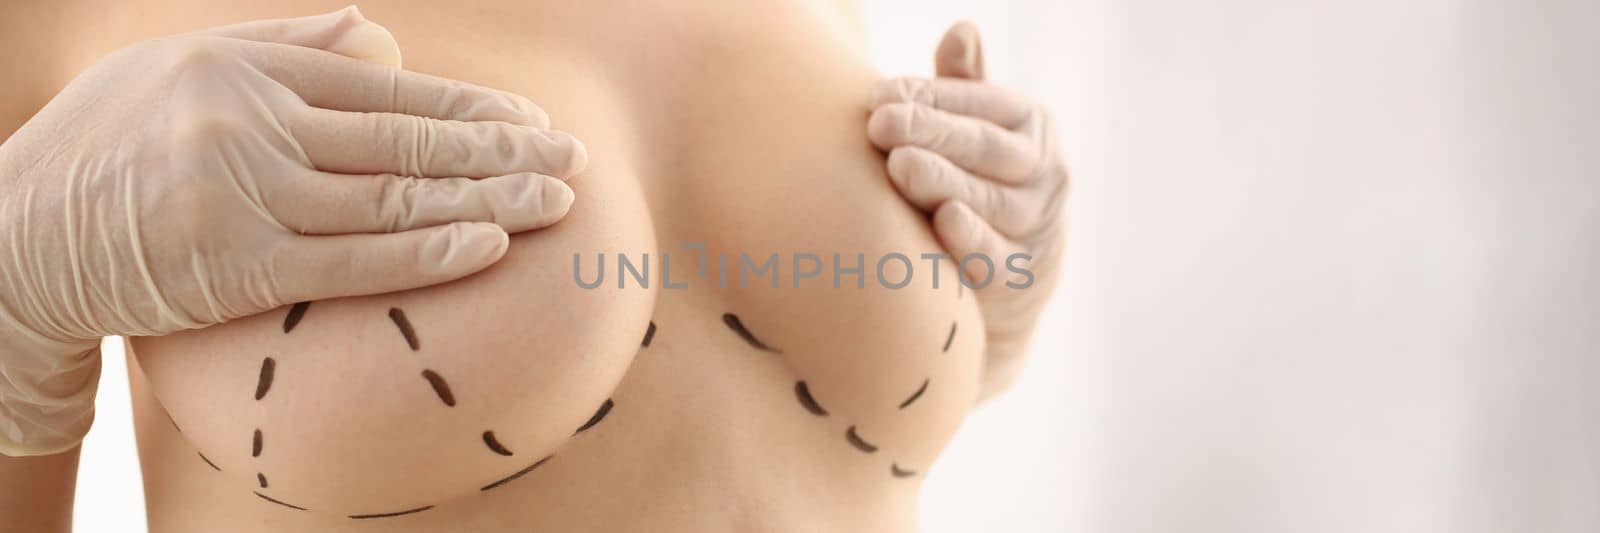 Woman with marks on chest for breast augmentation. Breast lift and augmentation concept